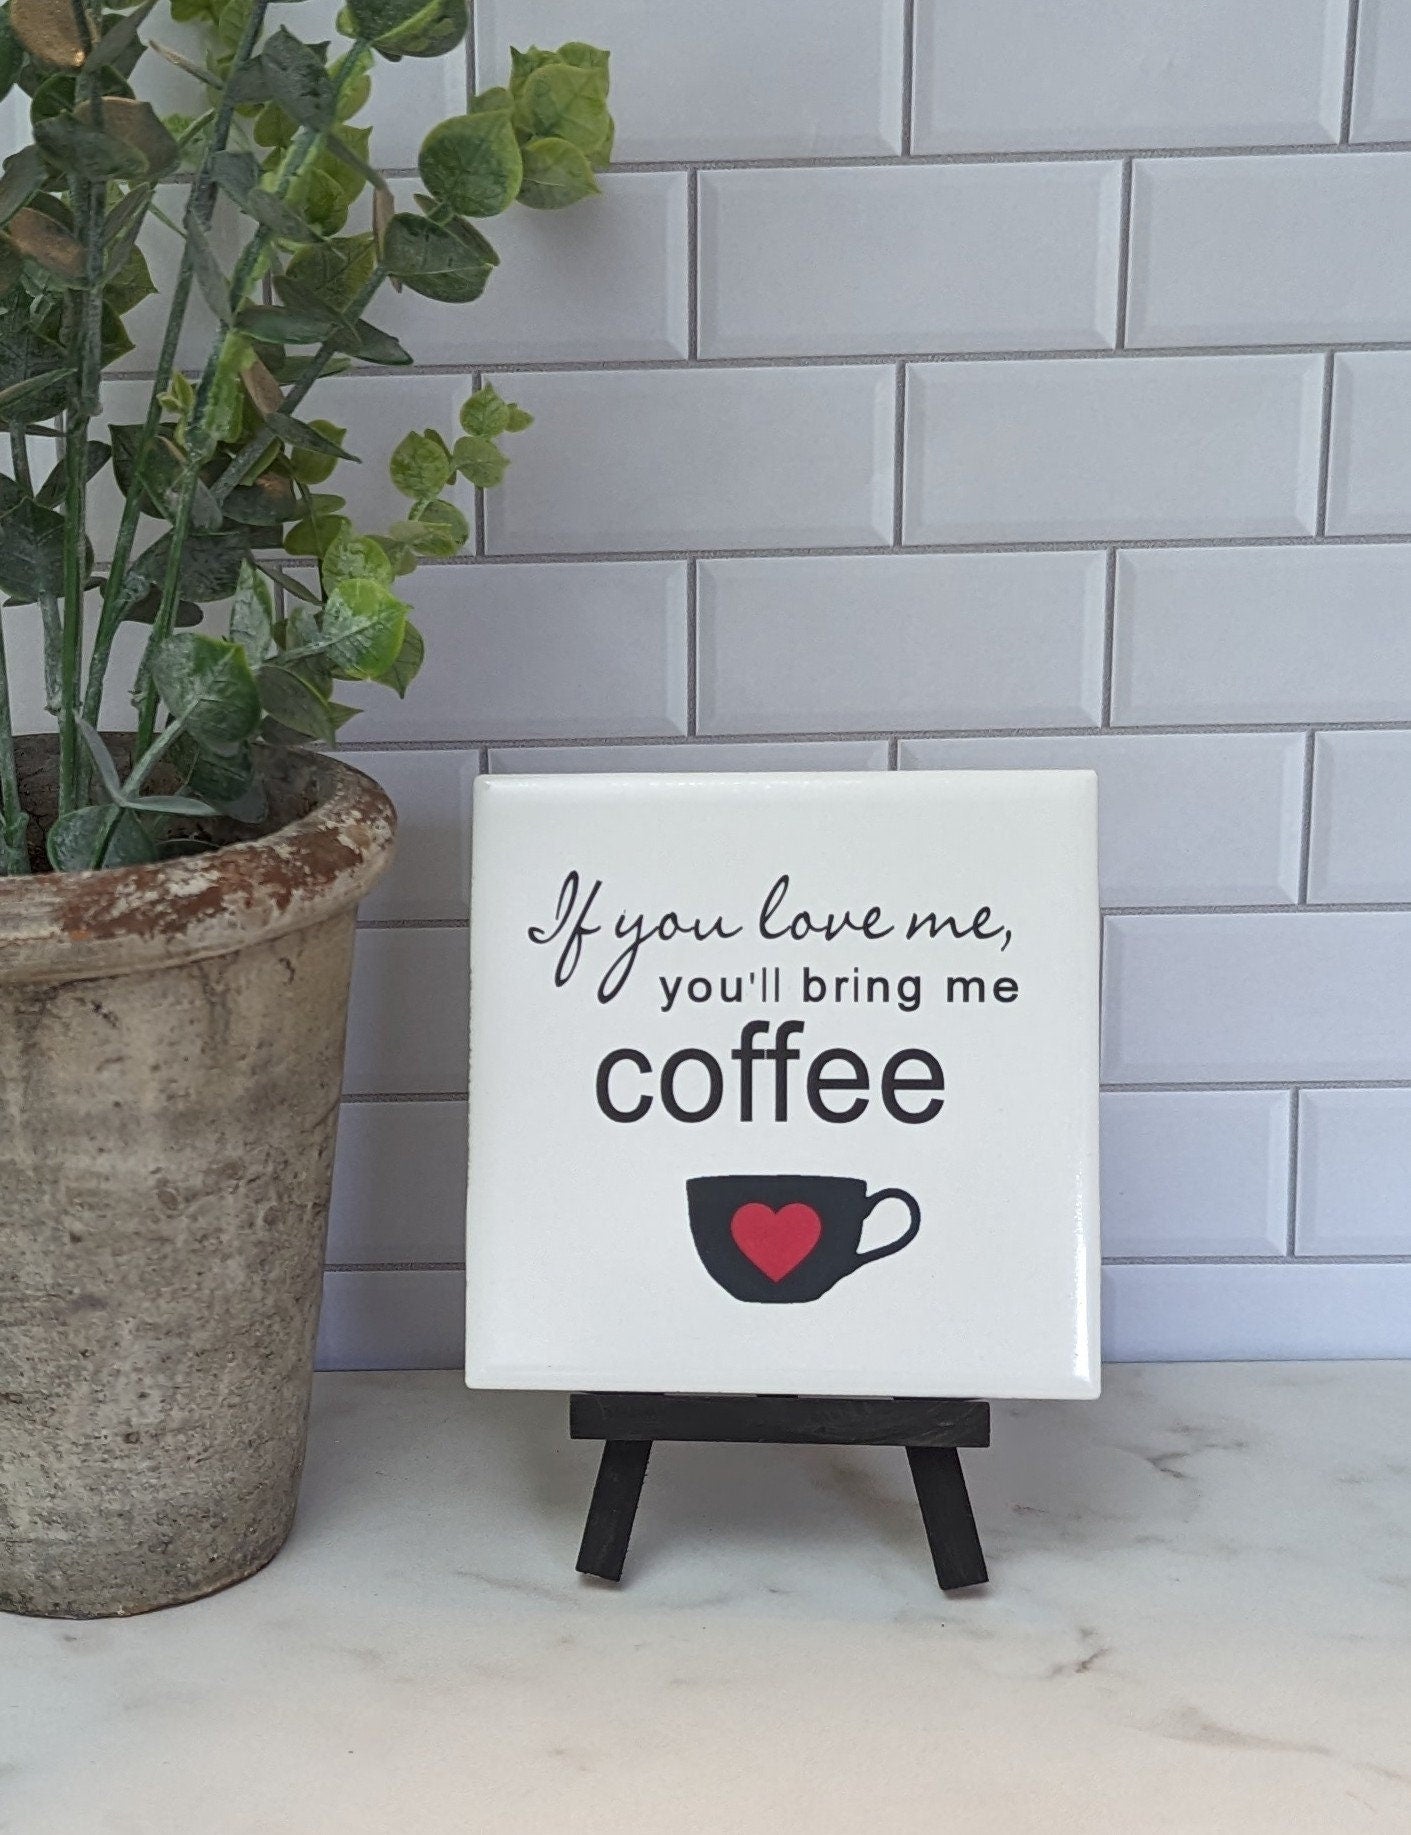 Coffee sign, easel sign, fresh brewed coffee tile sign - easel included, your color choice